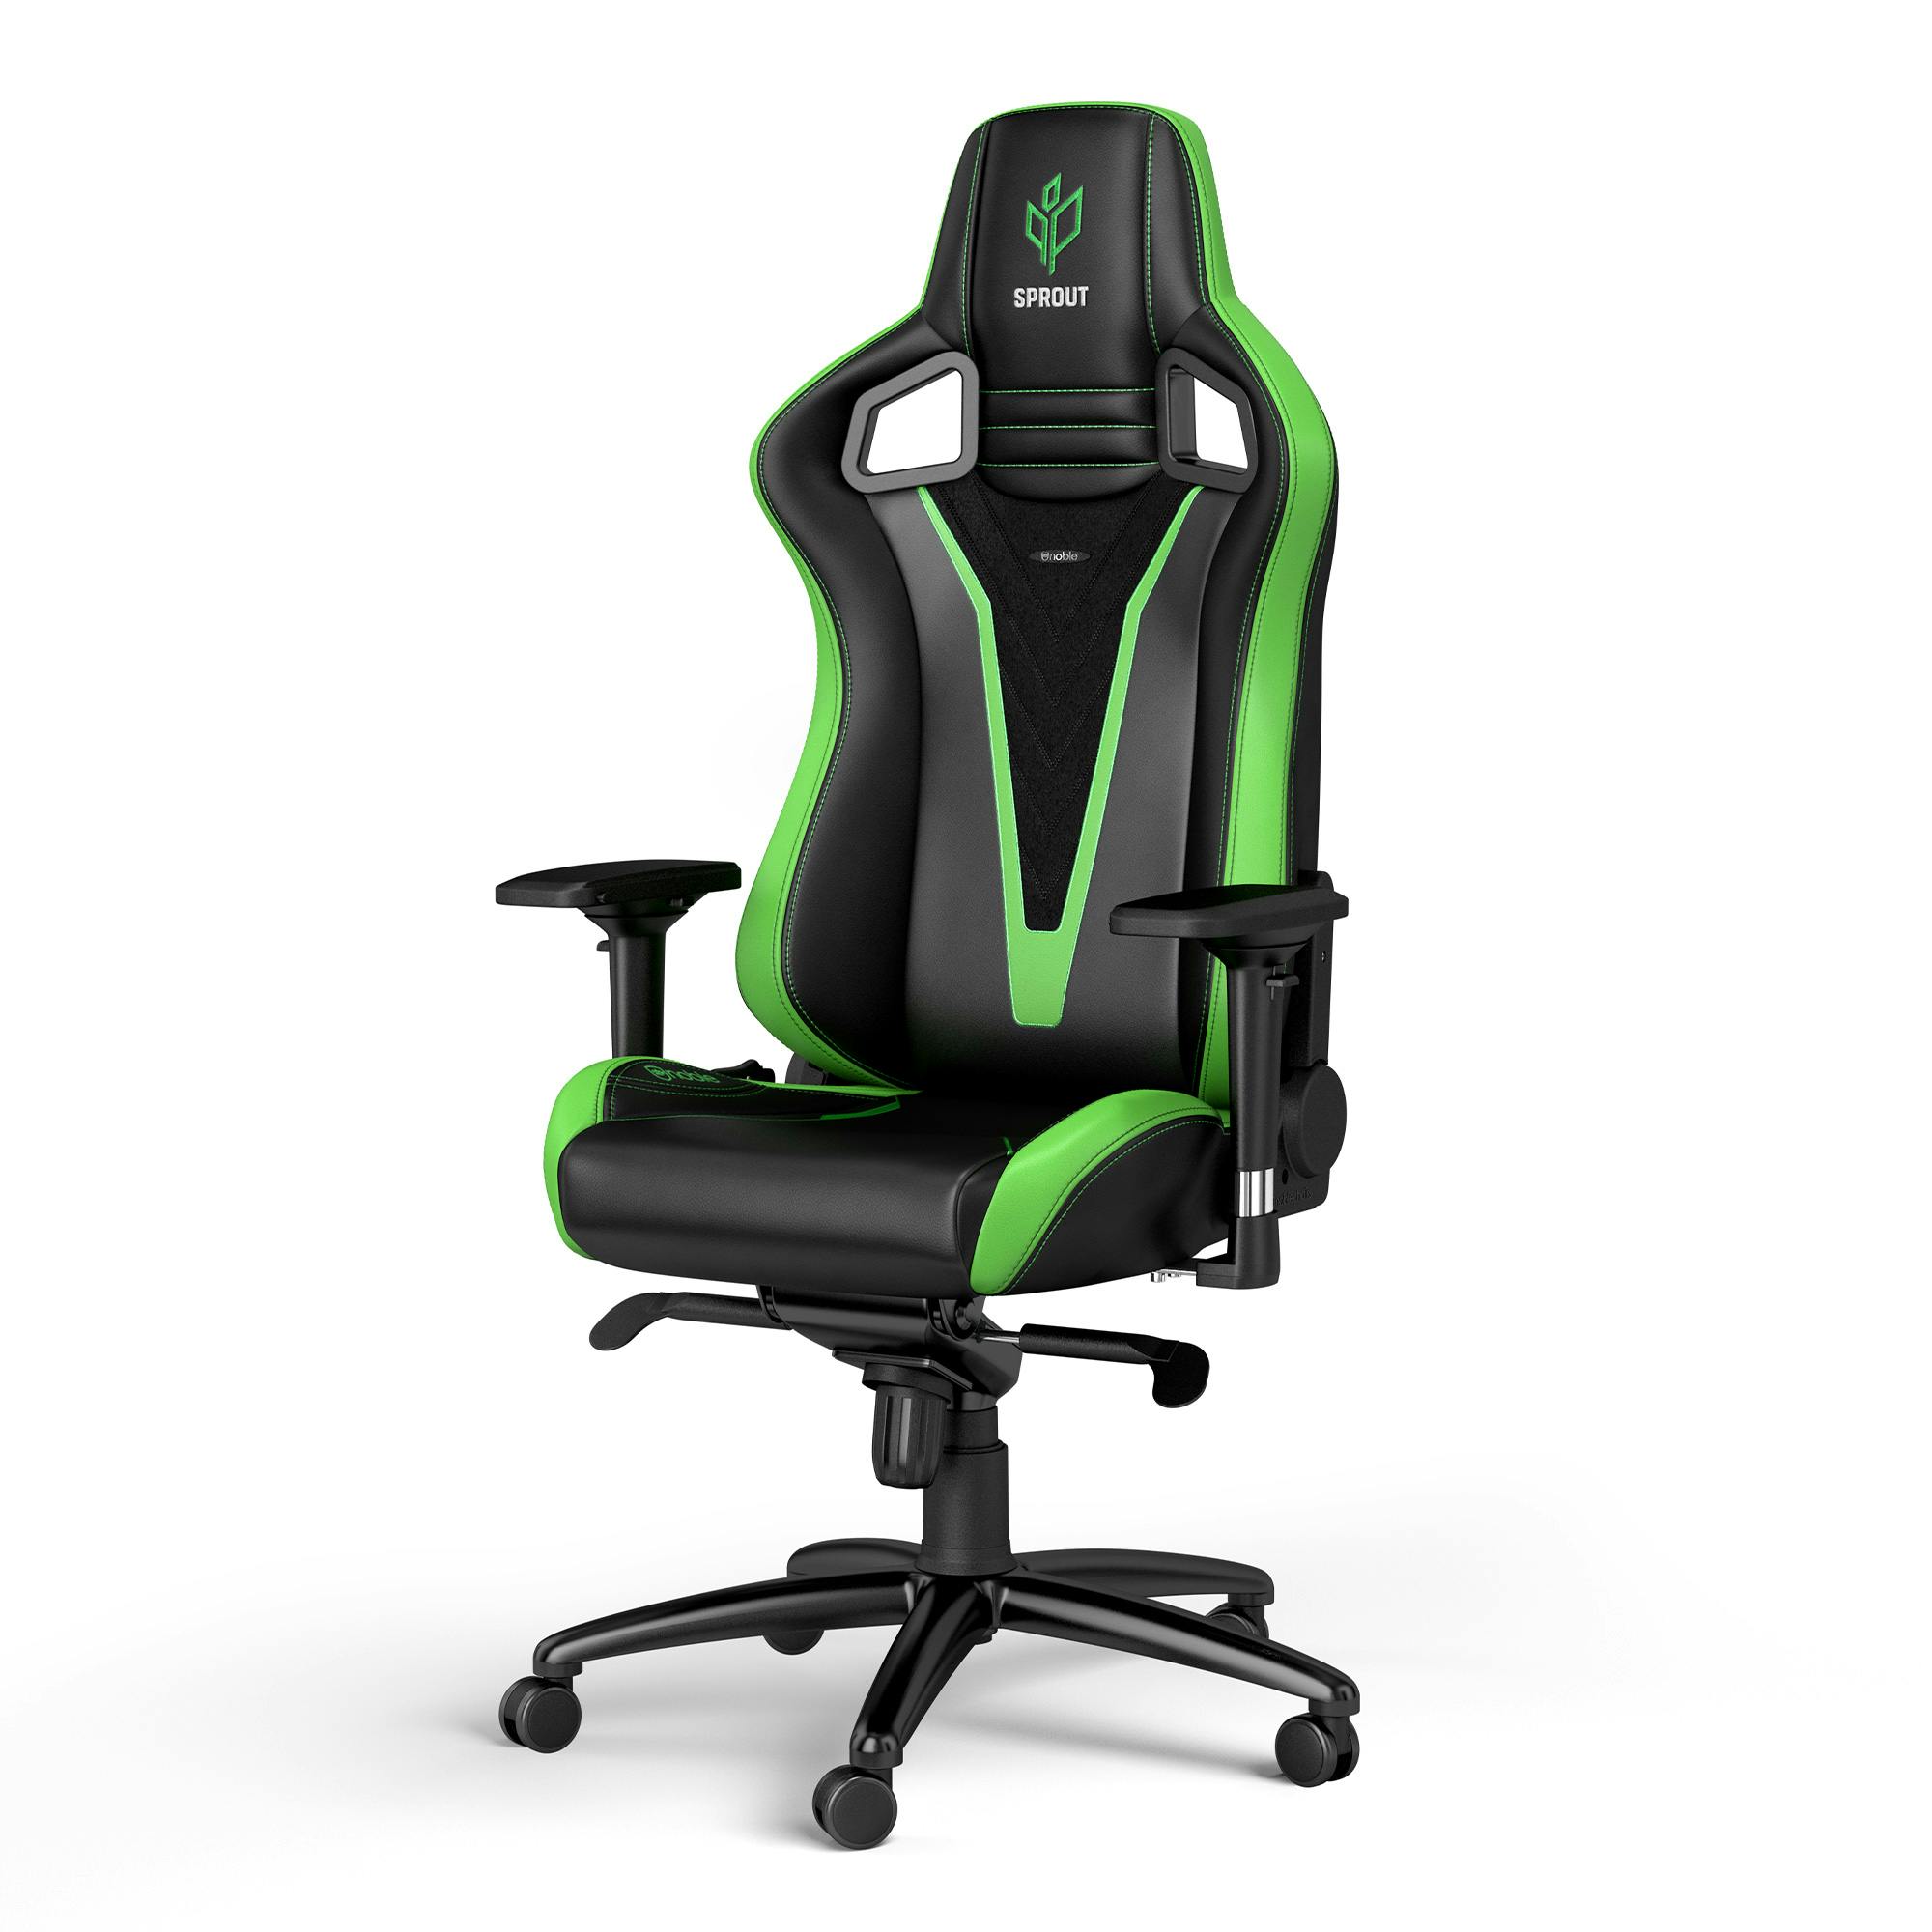 Noblechairs - EPIC Sprout Editie